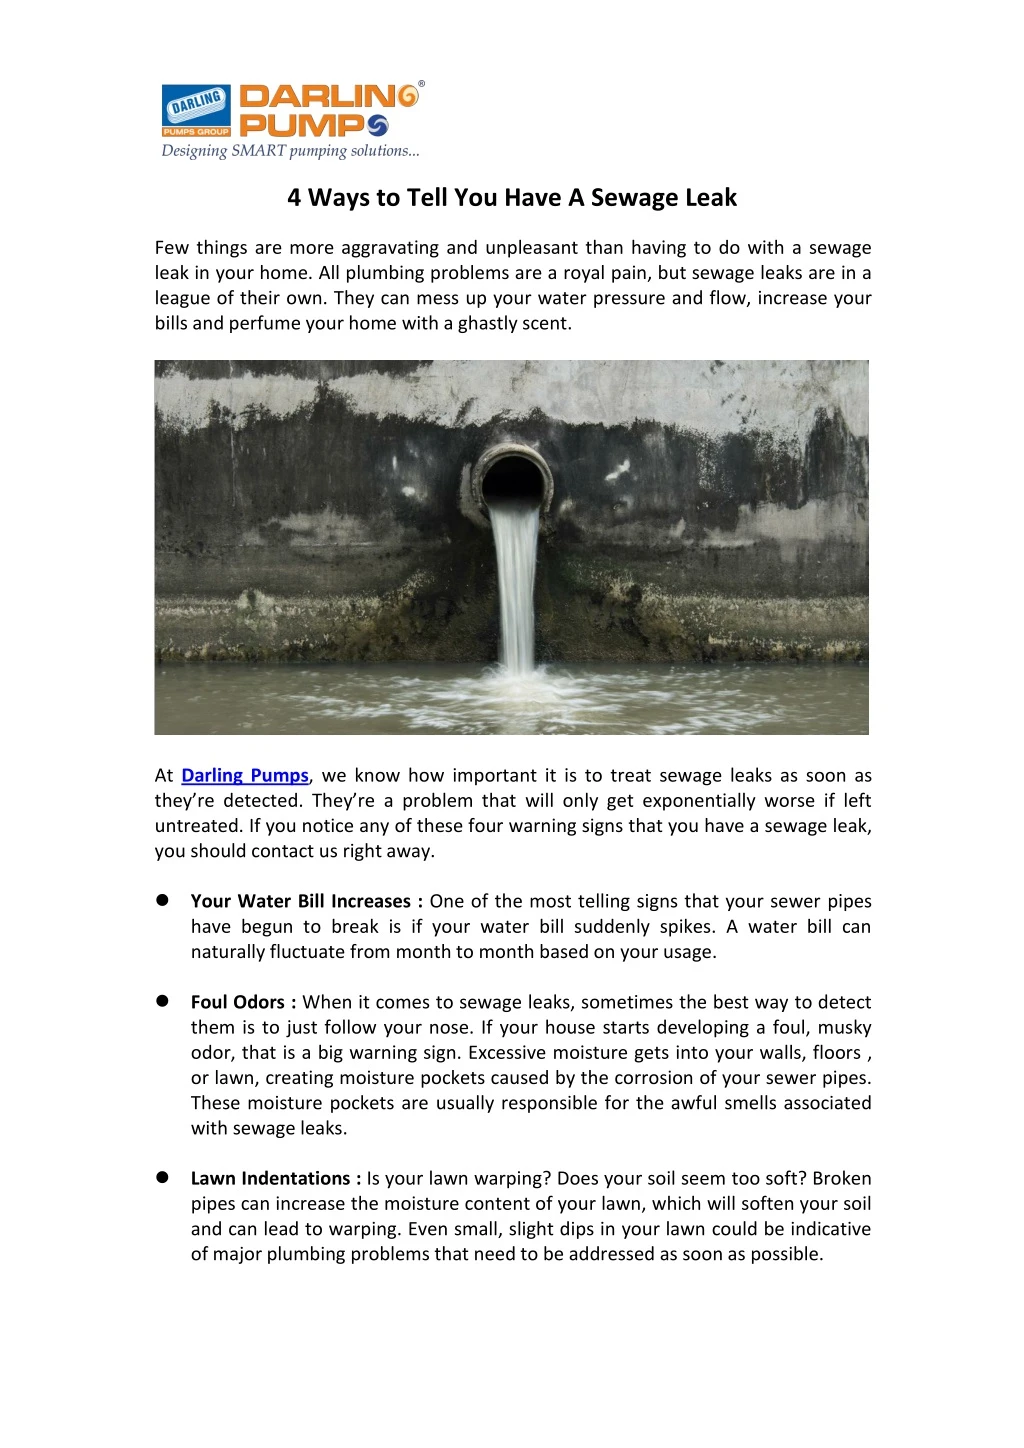 4 ways to tell you have a sewage leak